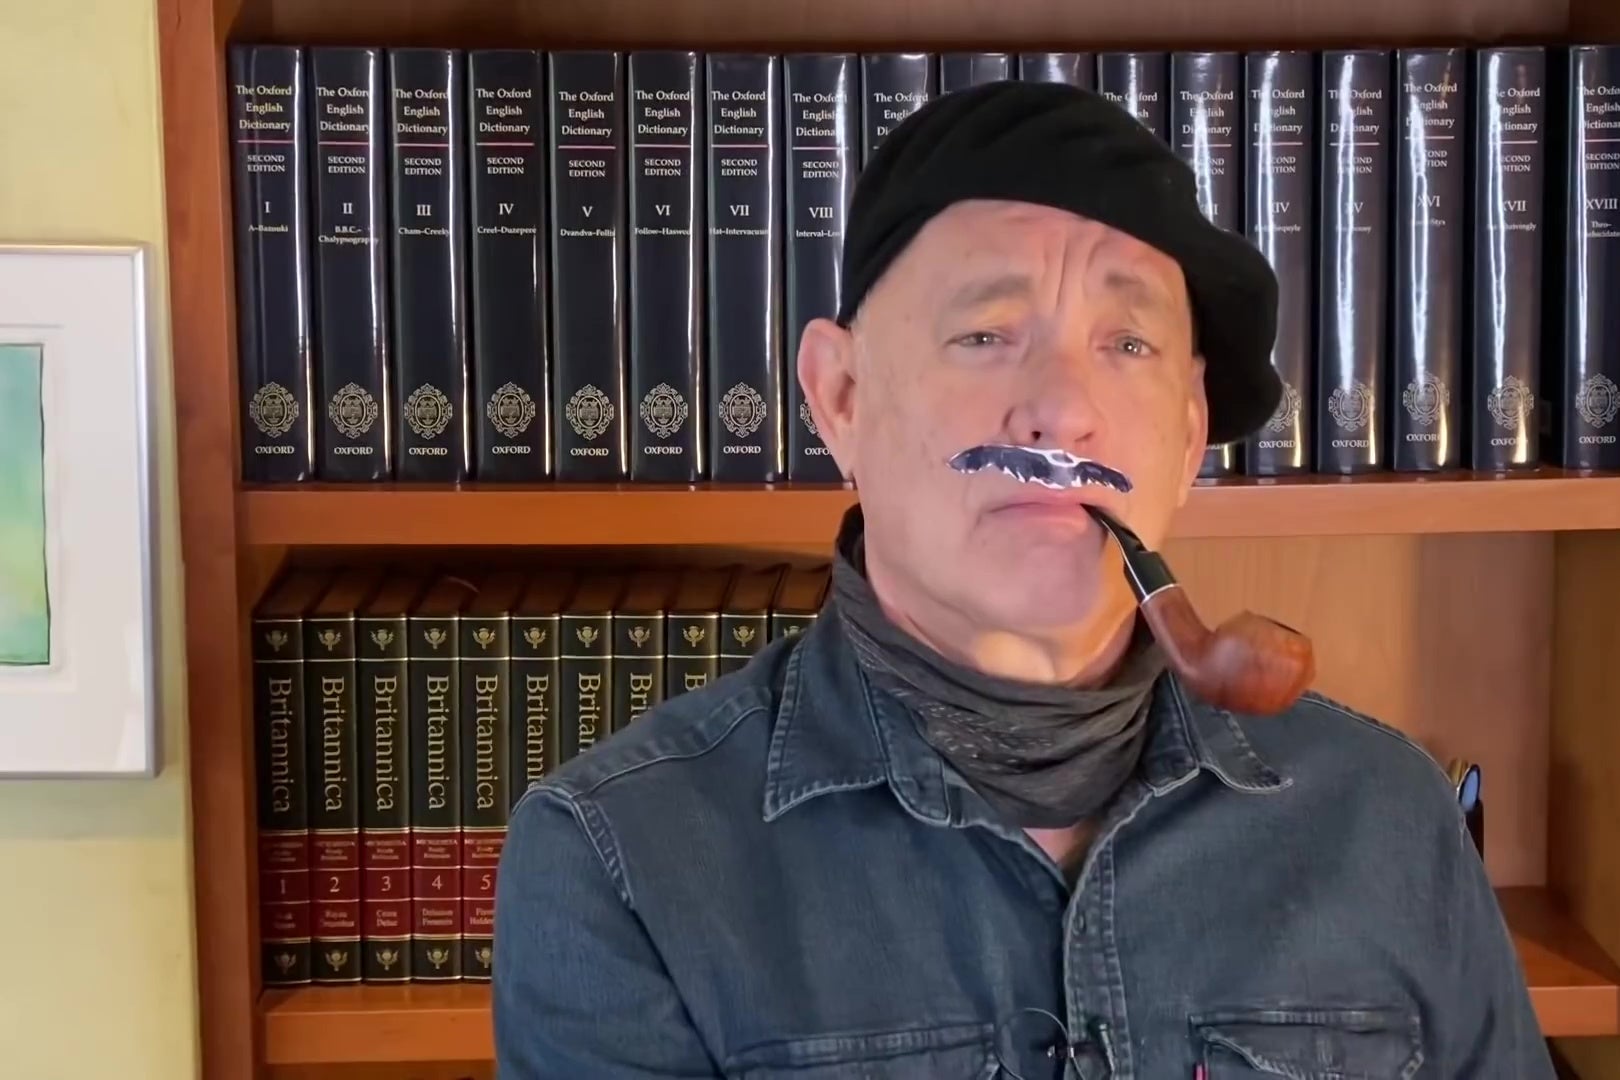 Tom Hanks, wearing a beret, fake mustache, denim shirt, and scarf, smokes a pipe in front of a bookshelf containing the first 18 volumes of the OED and an encyclopedia.